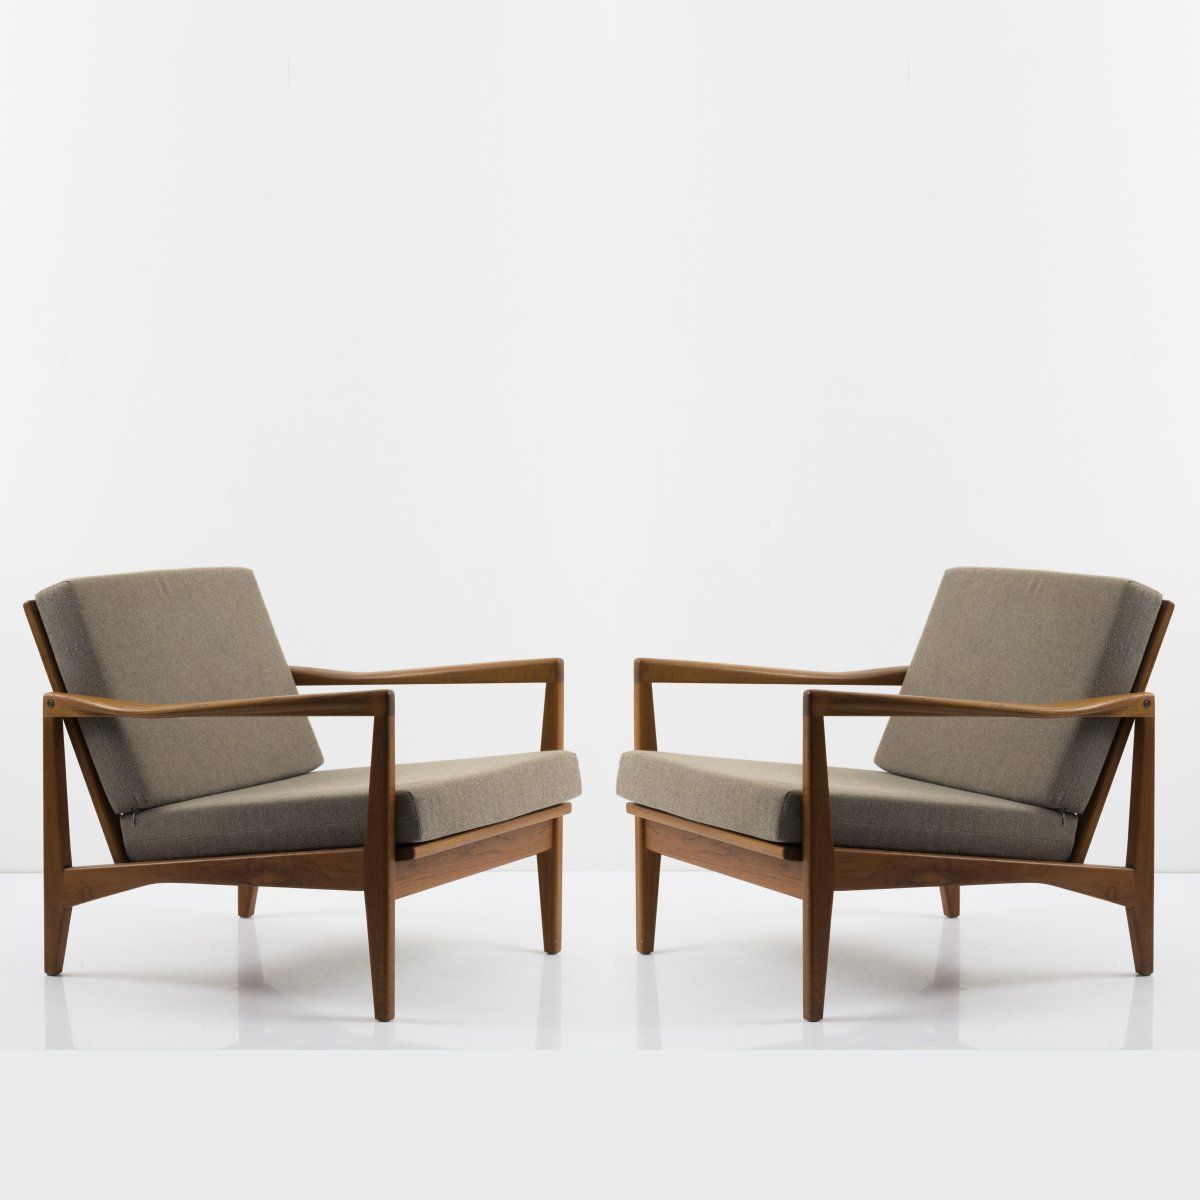 Null Svante Skogh, 2 armchairs, c. 1957, H. 69 x 73 x 79.5 cm. Made by Olof Pers&hellip;